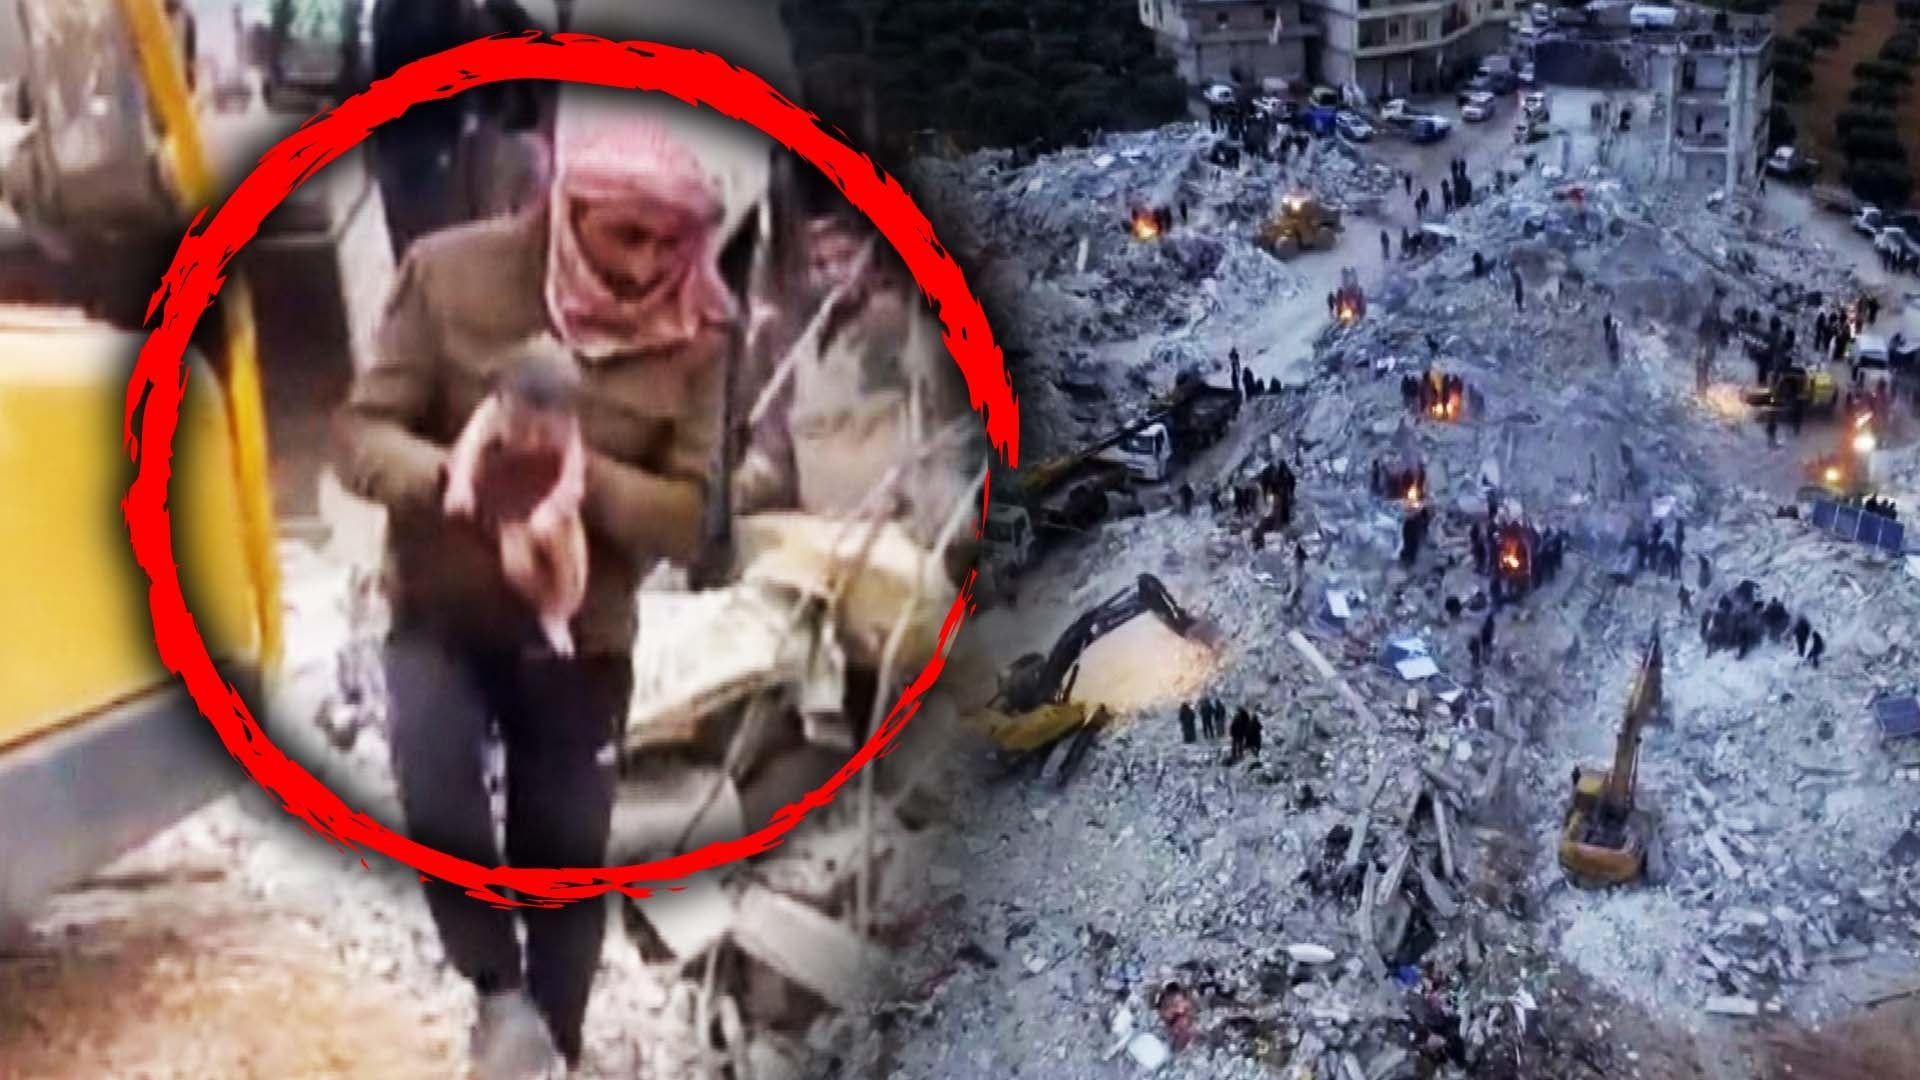 Newborn Baby Pulled From Turkey Earthquake Rubble After Building